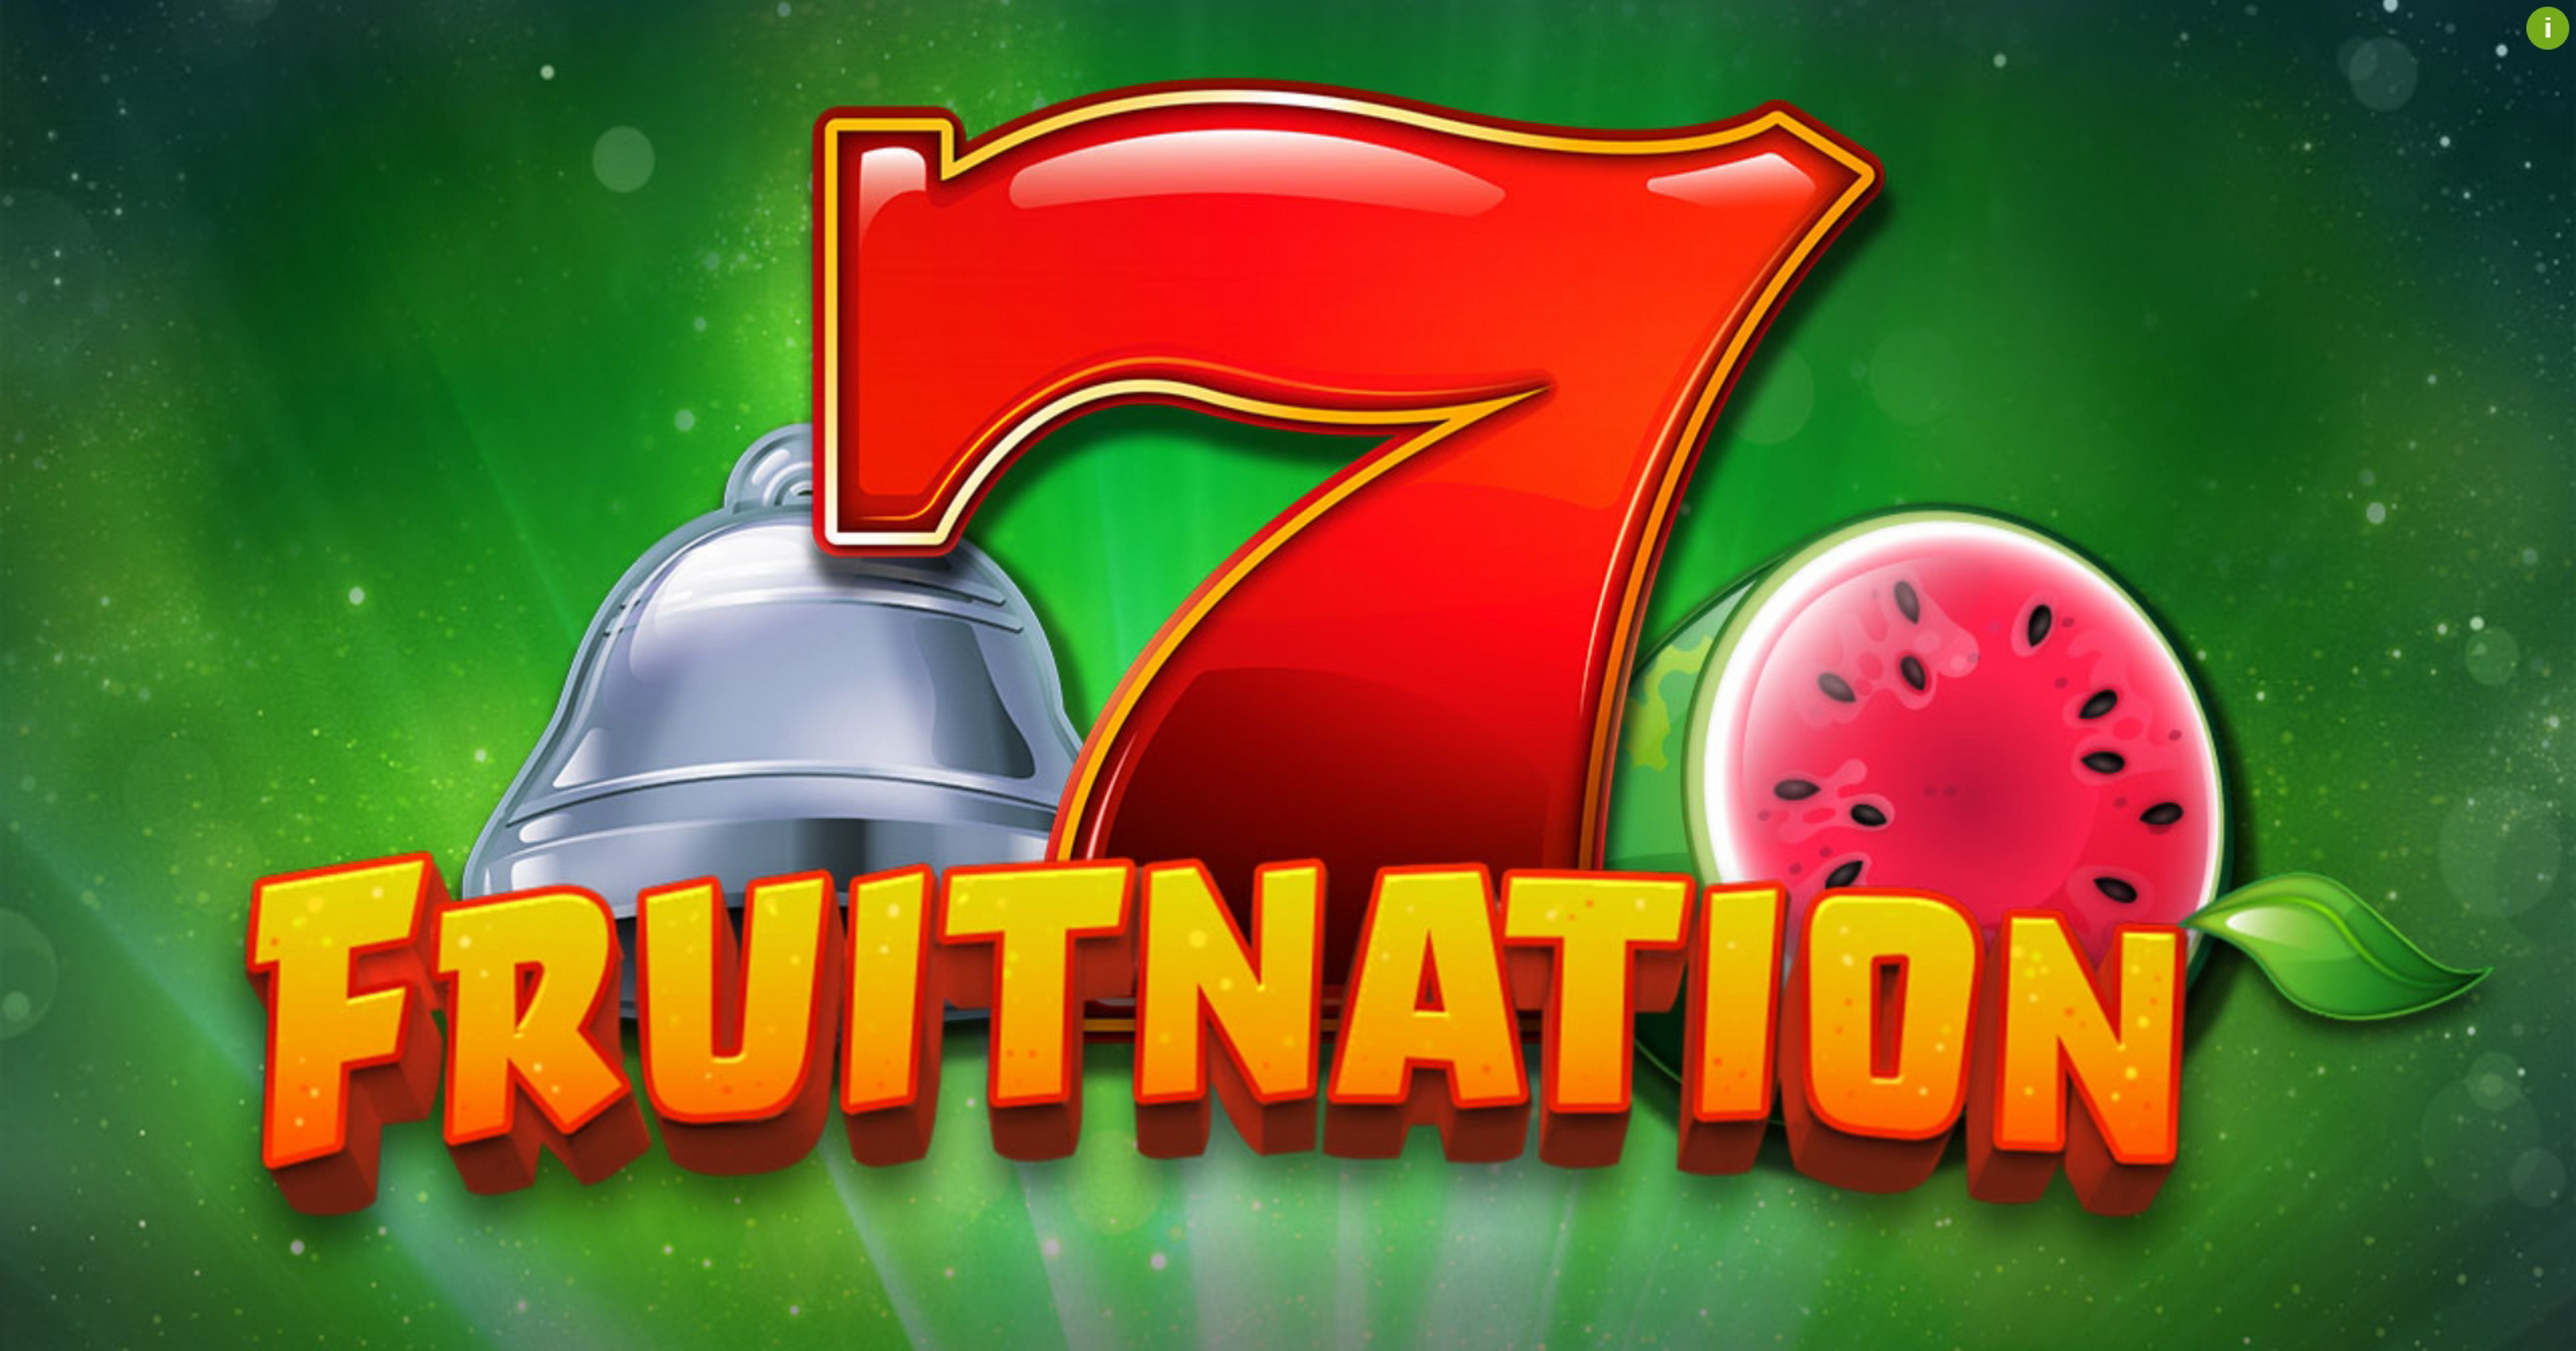 Play Fruitnation Free Casino Slot Game by Bally Technologies